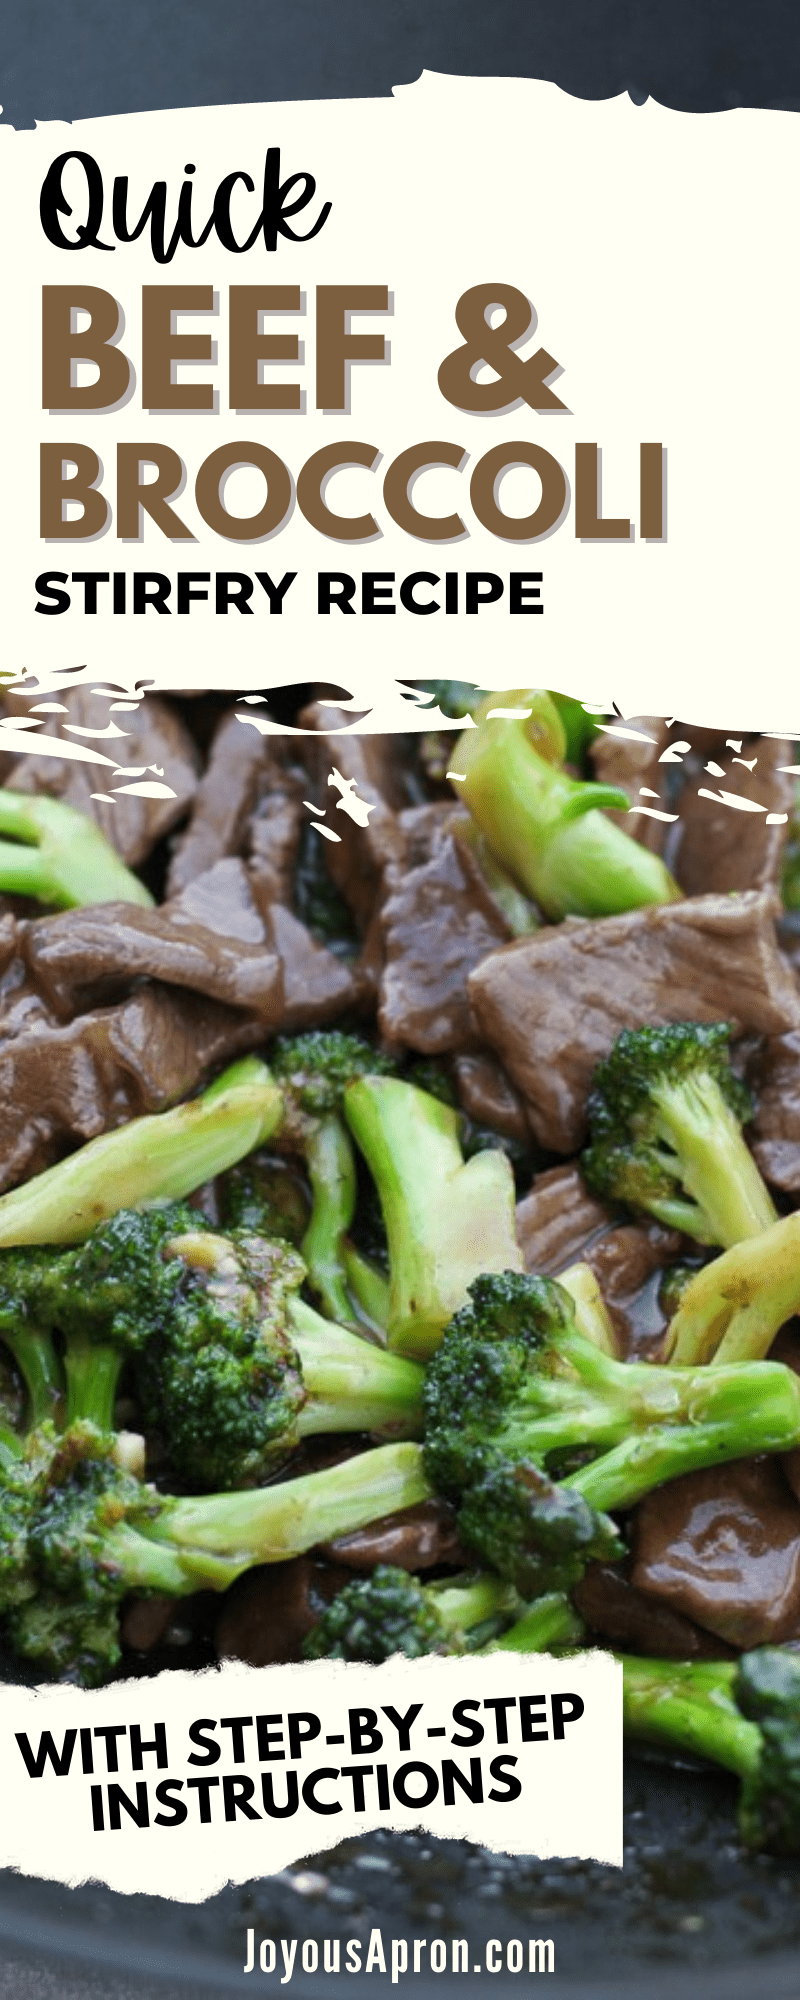 Beef and Broccoli Stir Fry - delicious and easy Chinese takeout recipe! Tender slices of beef is combined with broccoli, tossed in a delicious savory sweet sauce. A yummy Asian inspired meal! Served with rice. via @joyousapron